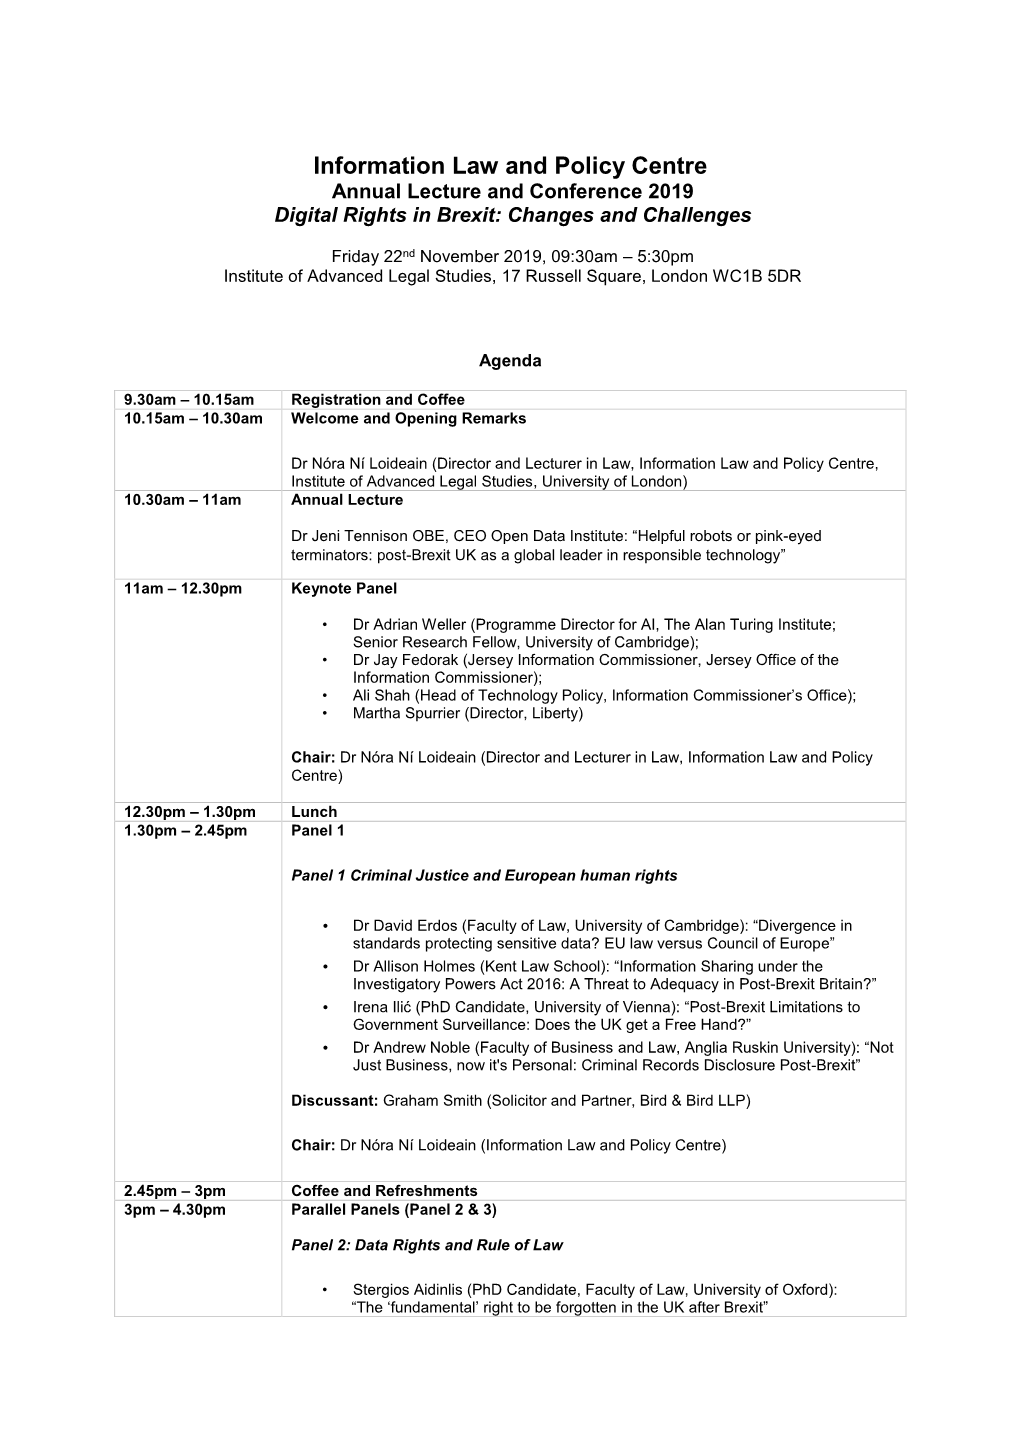 Information Law and Policy Centre Annual Lecture and Conference 2019 Digital Rights in Brexit: Changes and Challenges